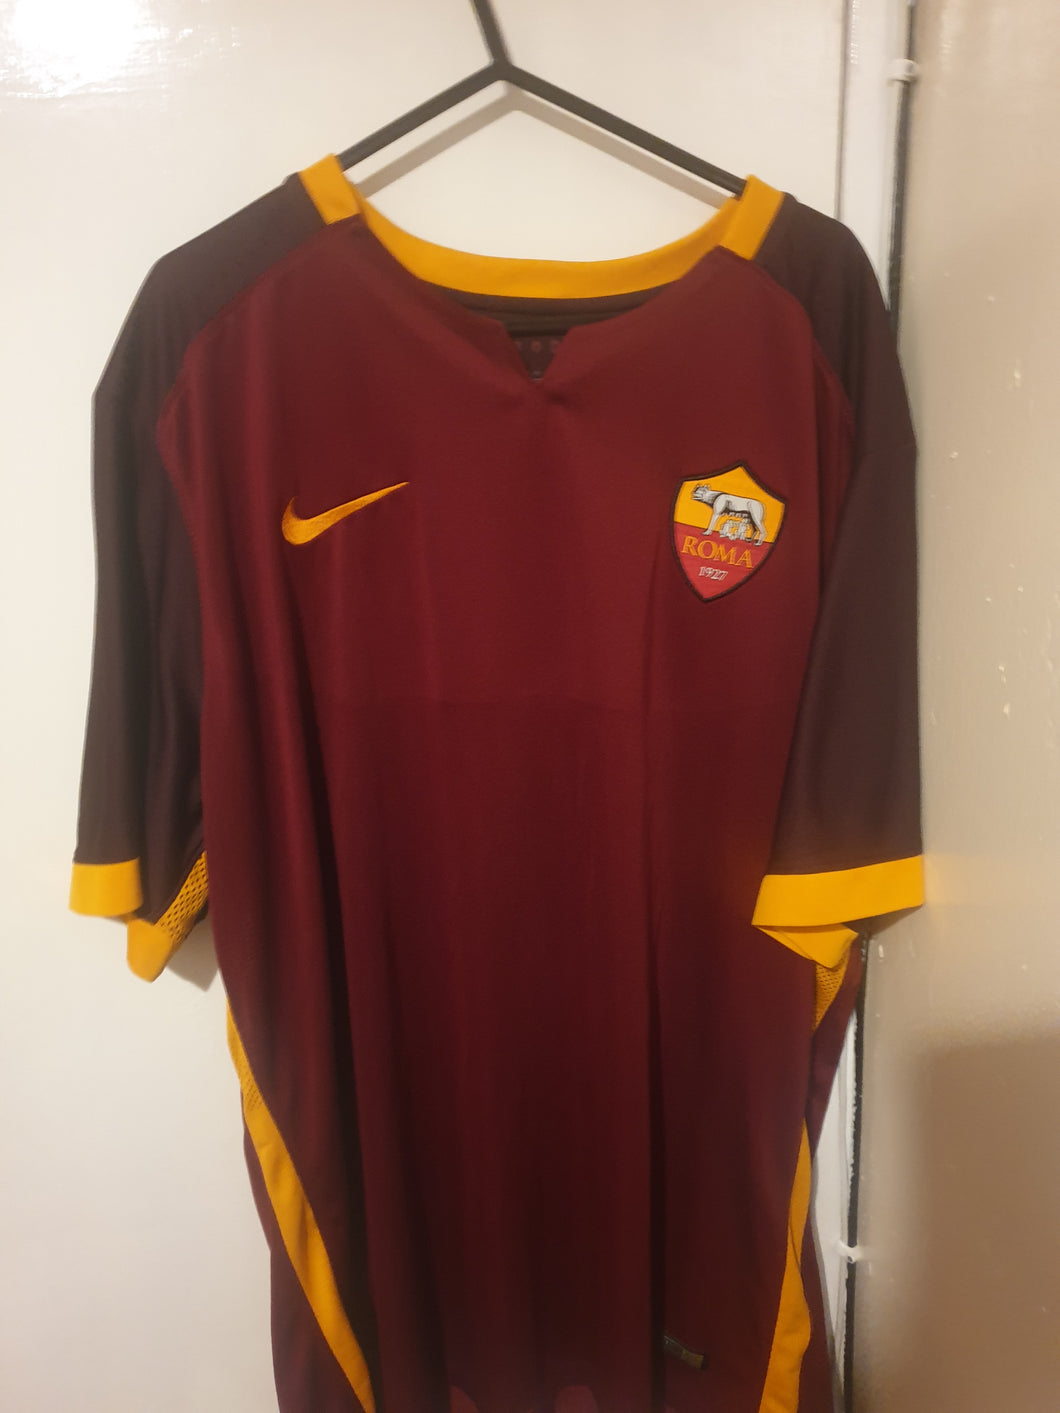 A.S Roma 2015-16 Player Issue Home Shirt (Size XXL)